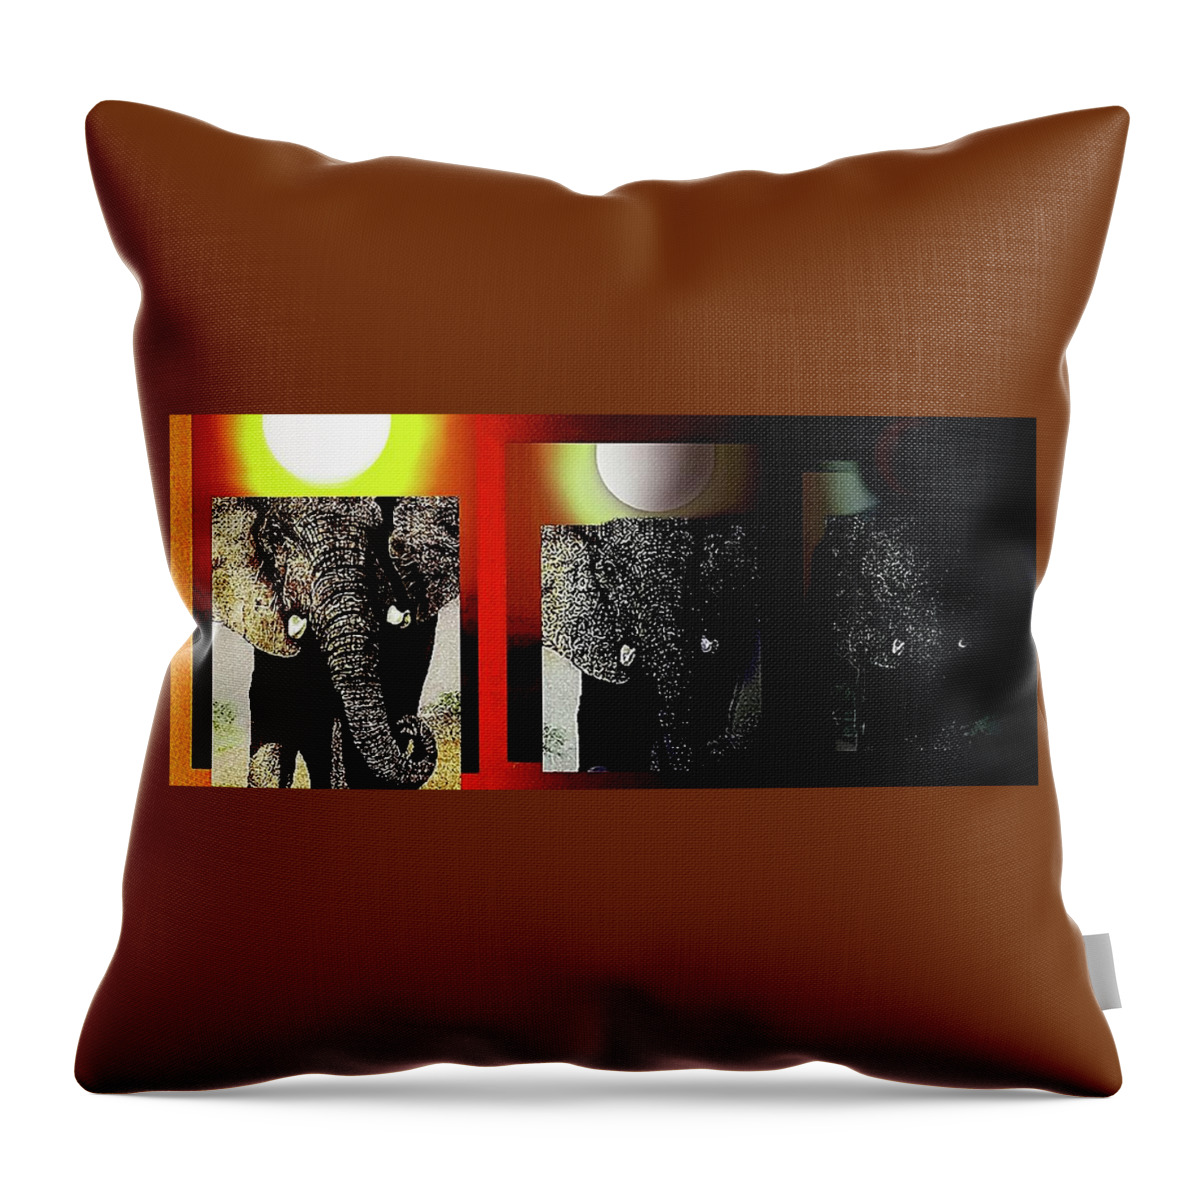 Elephant Throw Pillow featuring the painting Save Our Precious Elephants by Hartmut Jager